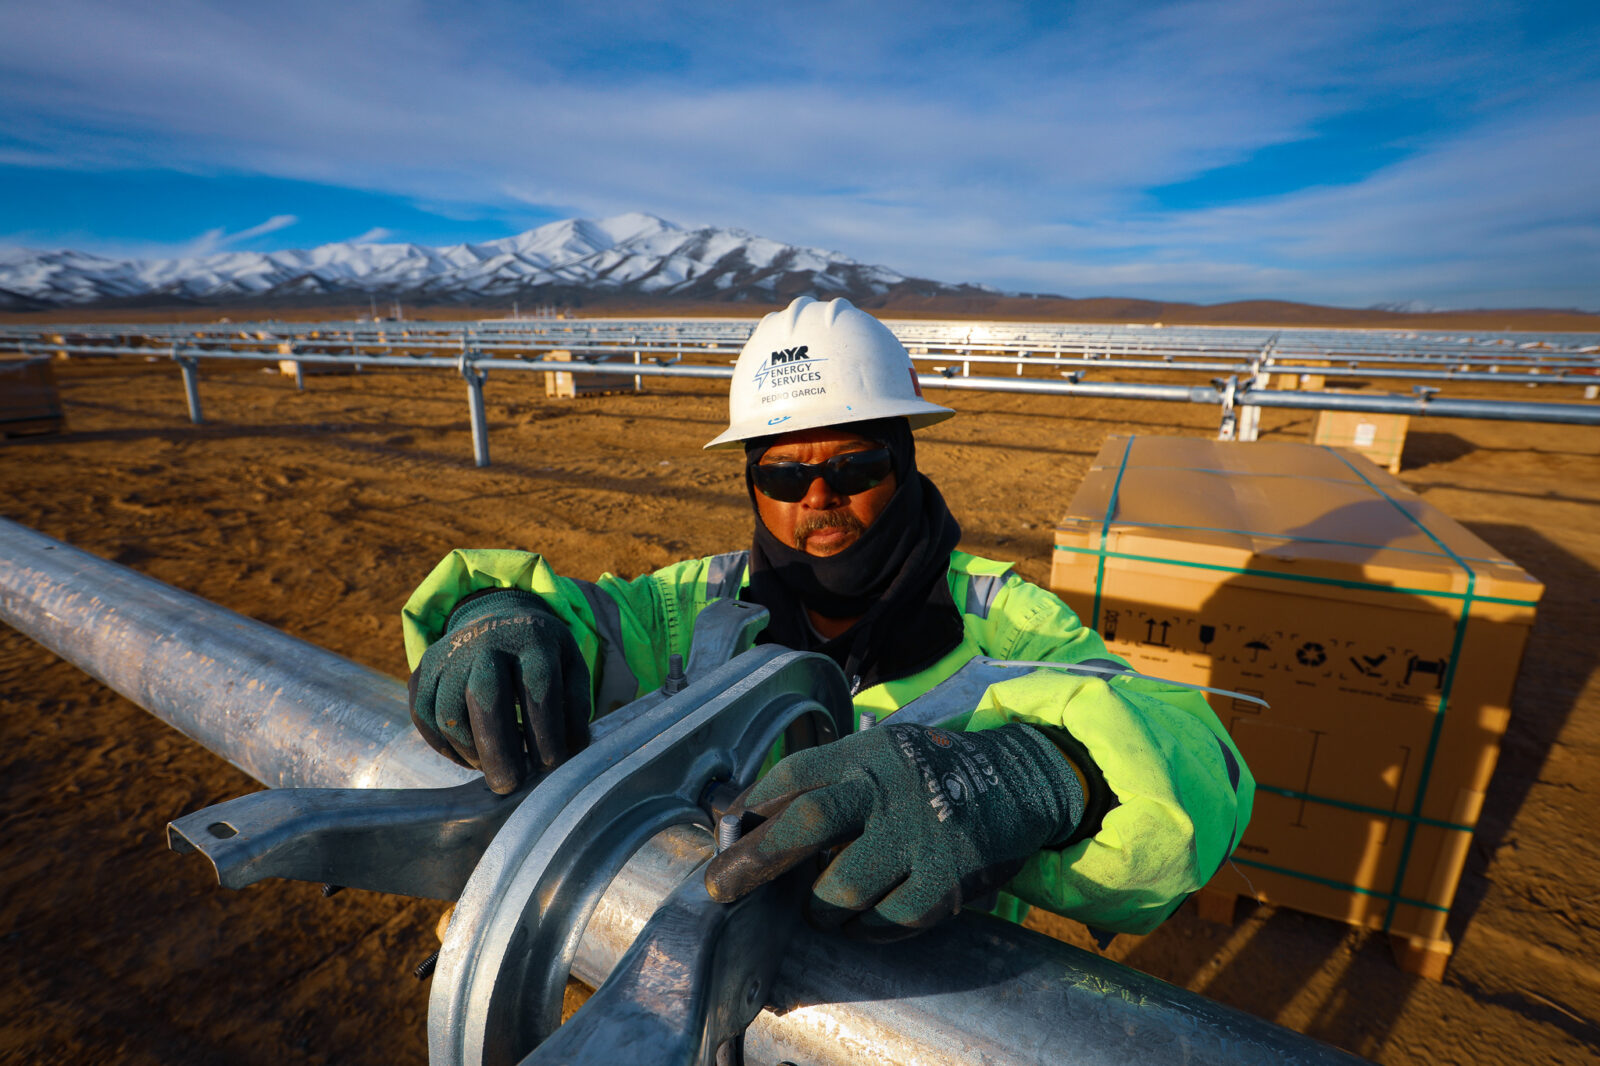 ͵E Energy employee prepares for solar panel installation with snowcapped mountains in the distance